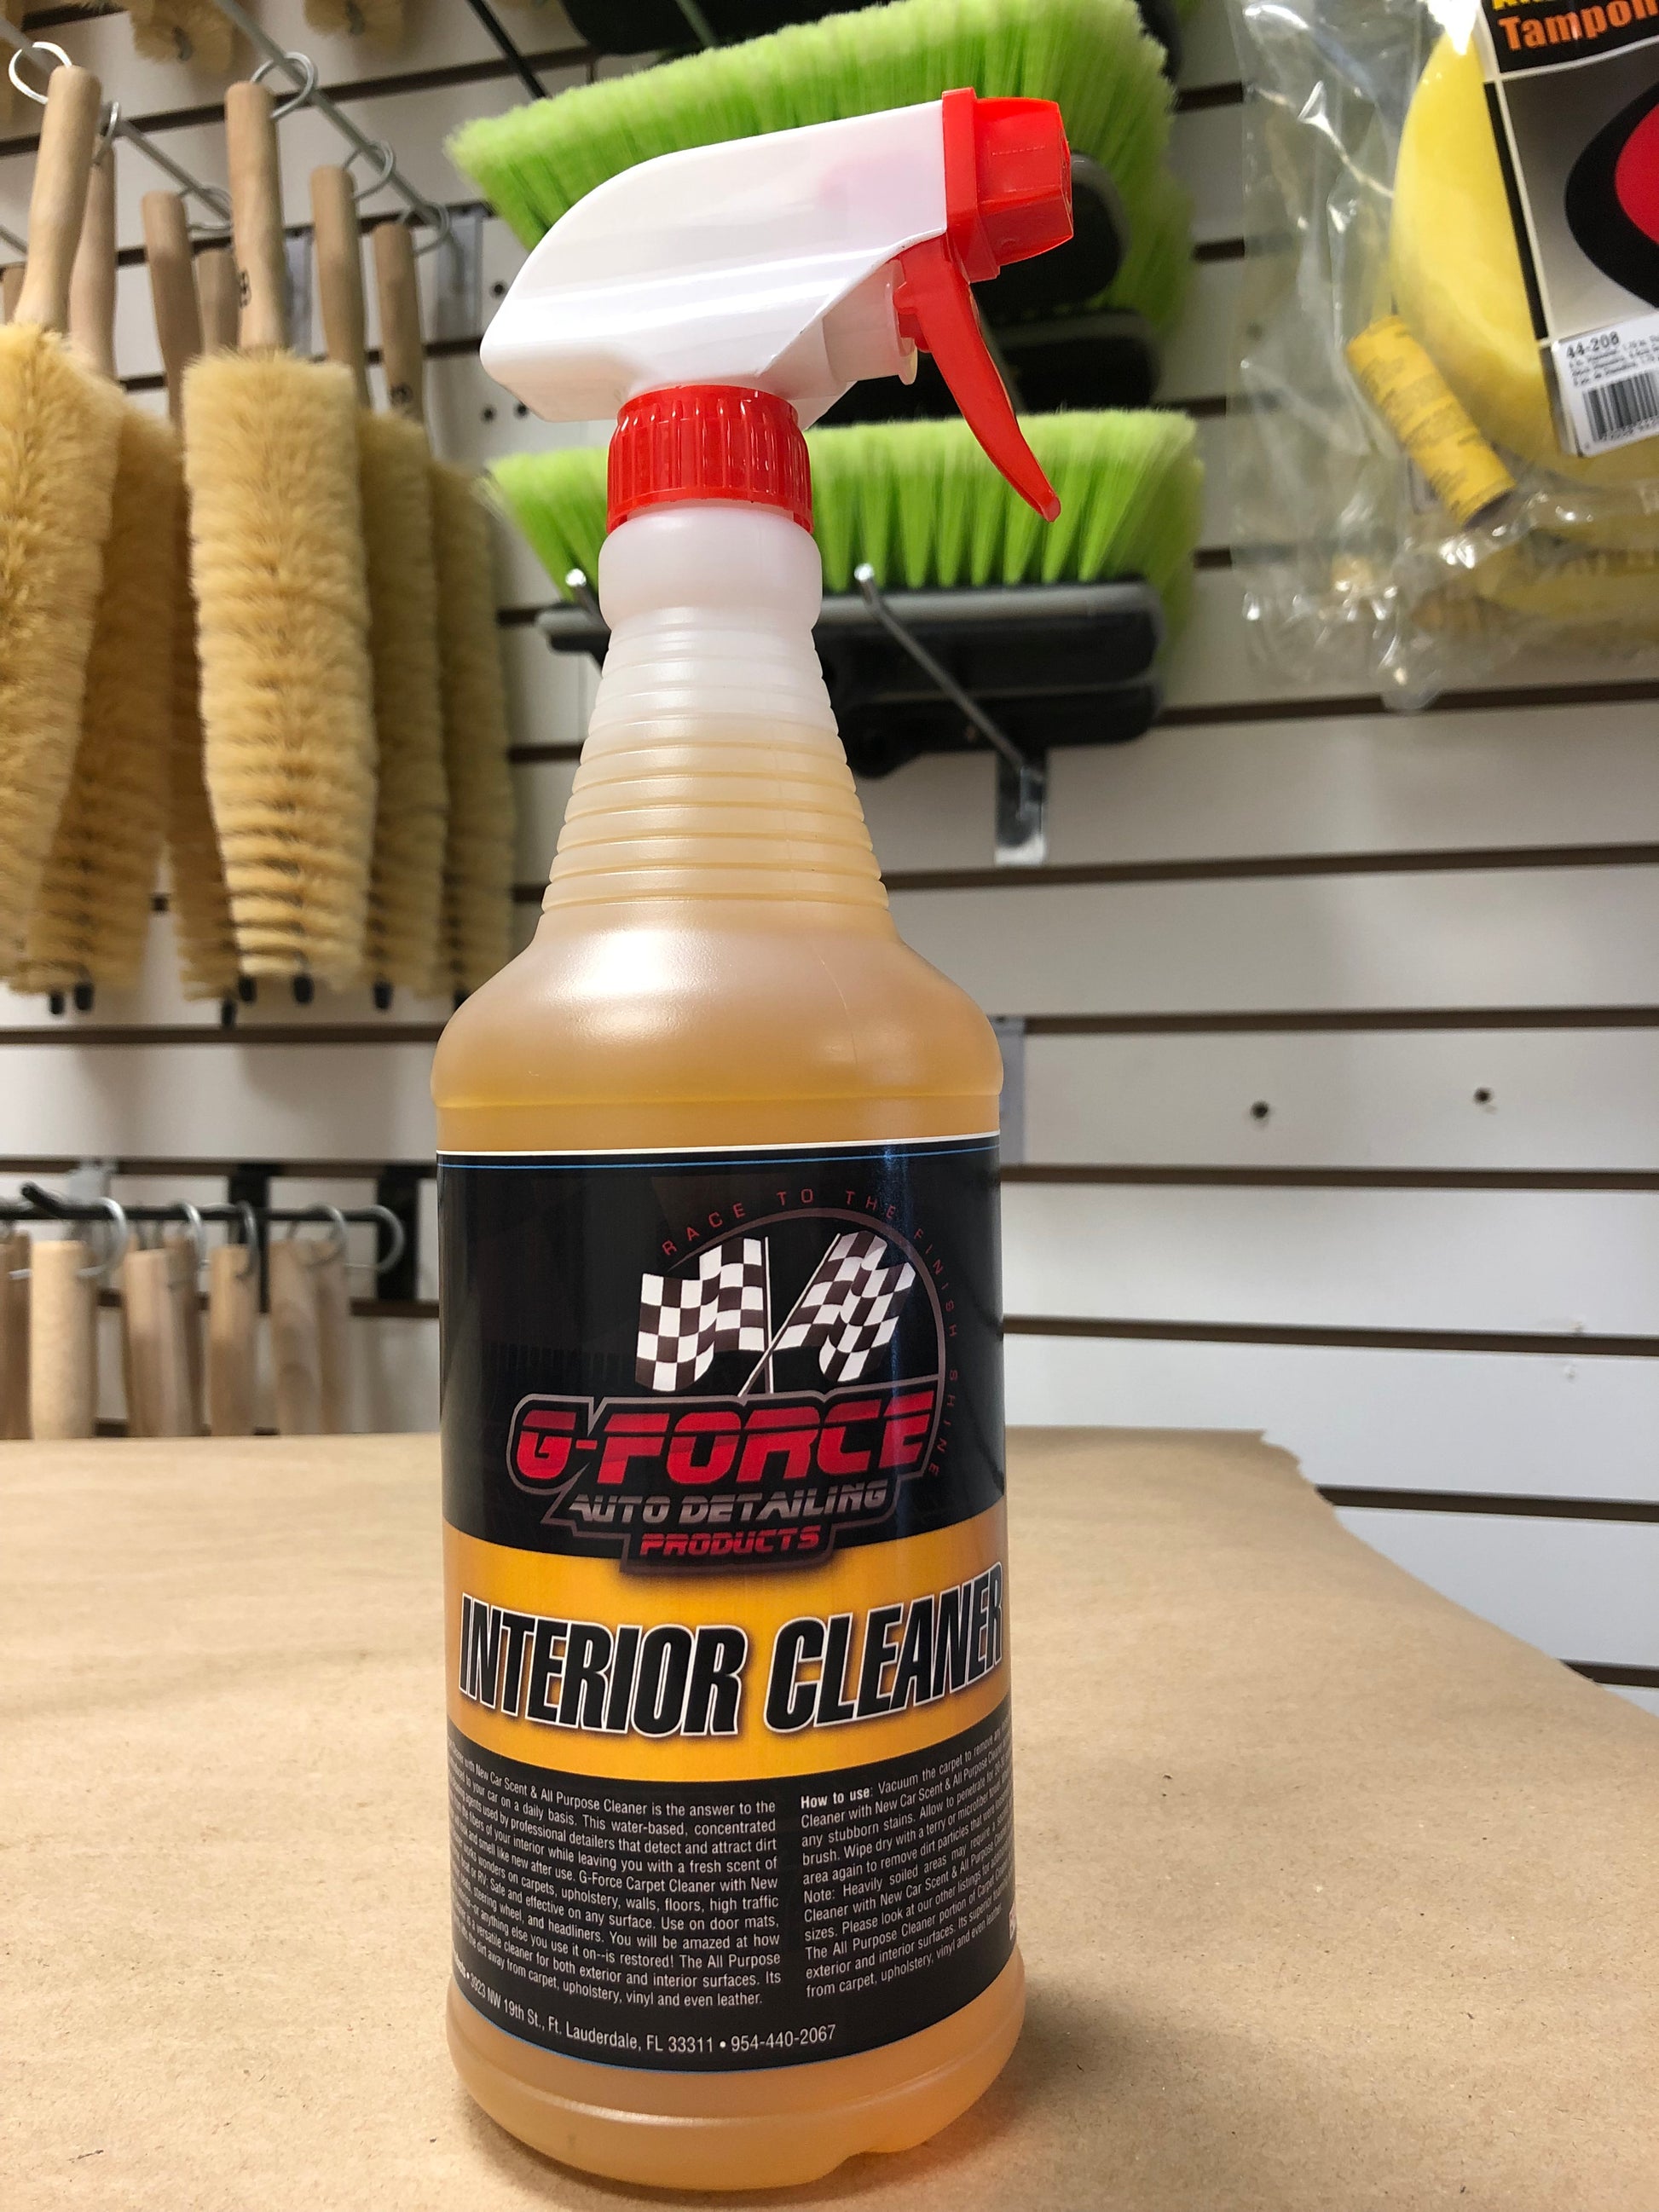 Detailing + - MEGUIARS ALL PURPOSE CLEANER is a versatile cleaner